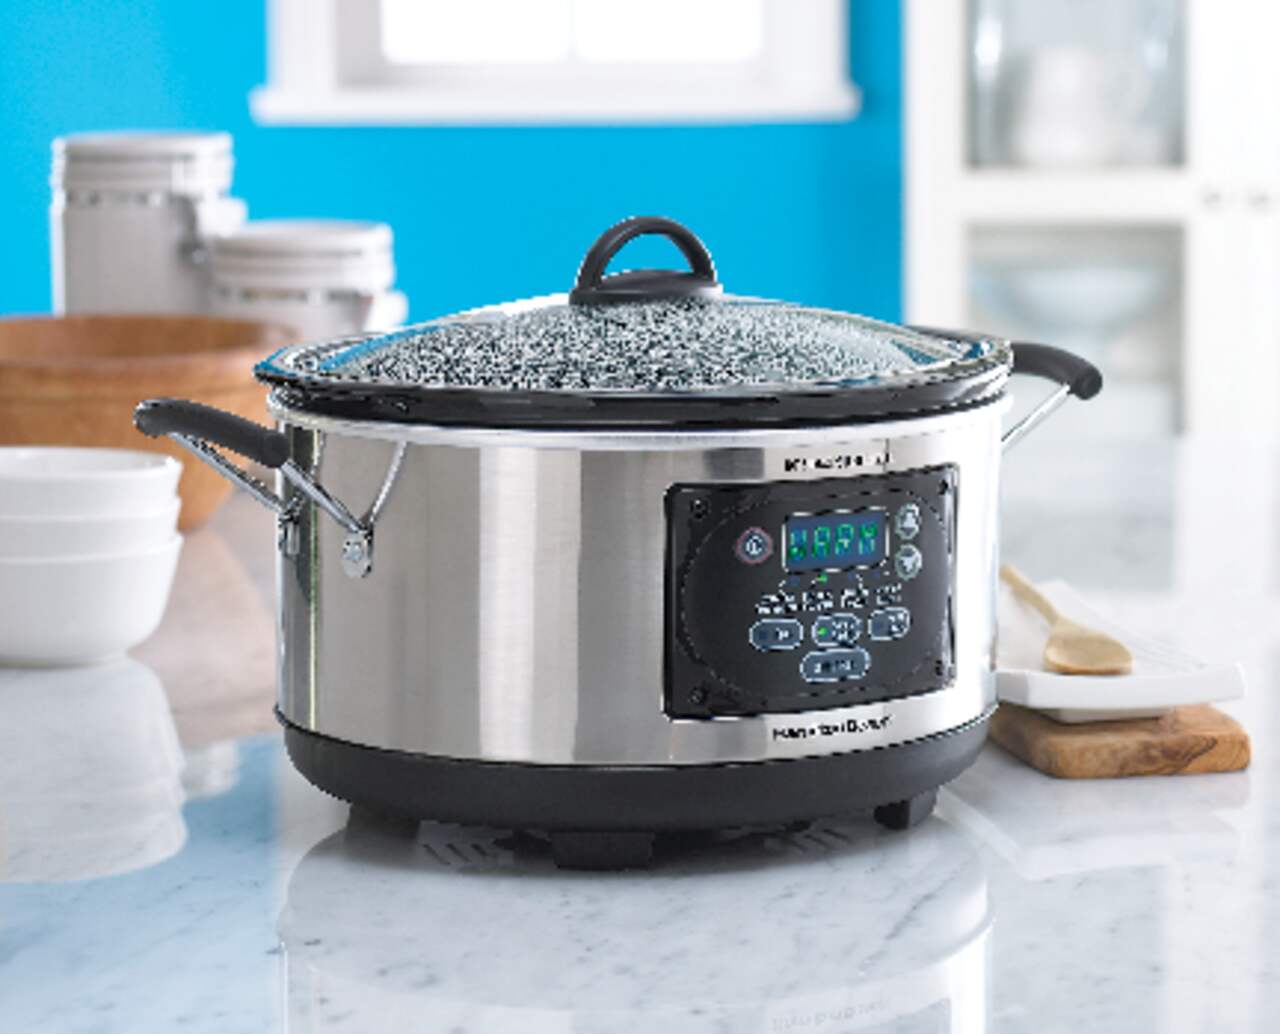 https://media-www.canadiantire.ca/product/living/kitchen/kitchen-appliances/0431605/hamilton-beach-programmable-slow-cooker-f8aab967-624d-40e6-9689-a2e99ea1c48a.png?imdensity=1&imwidth=1244&impolicy=mZoom